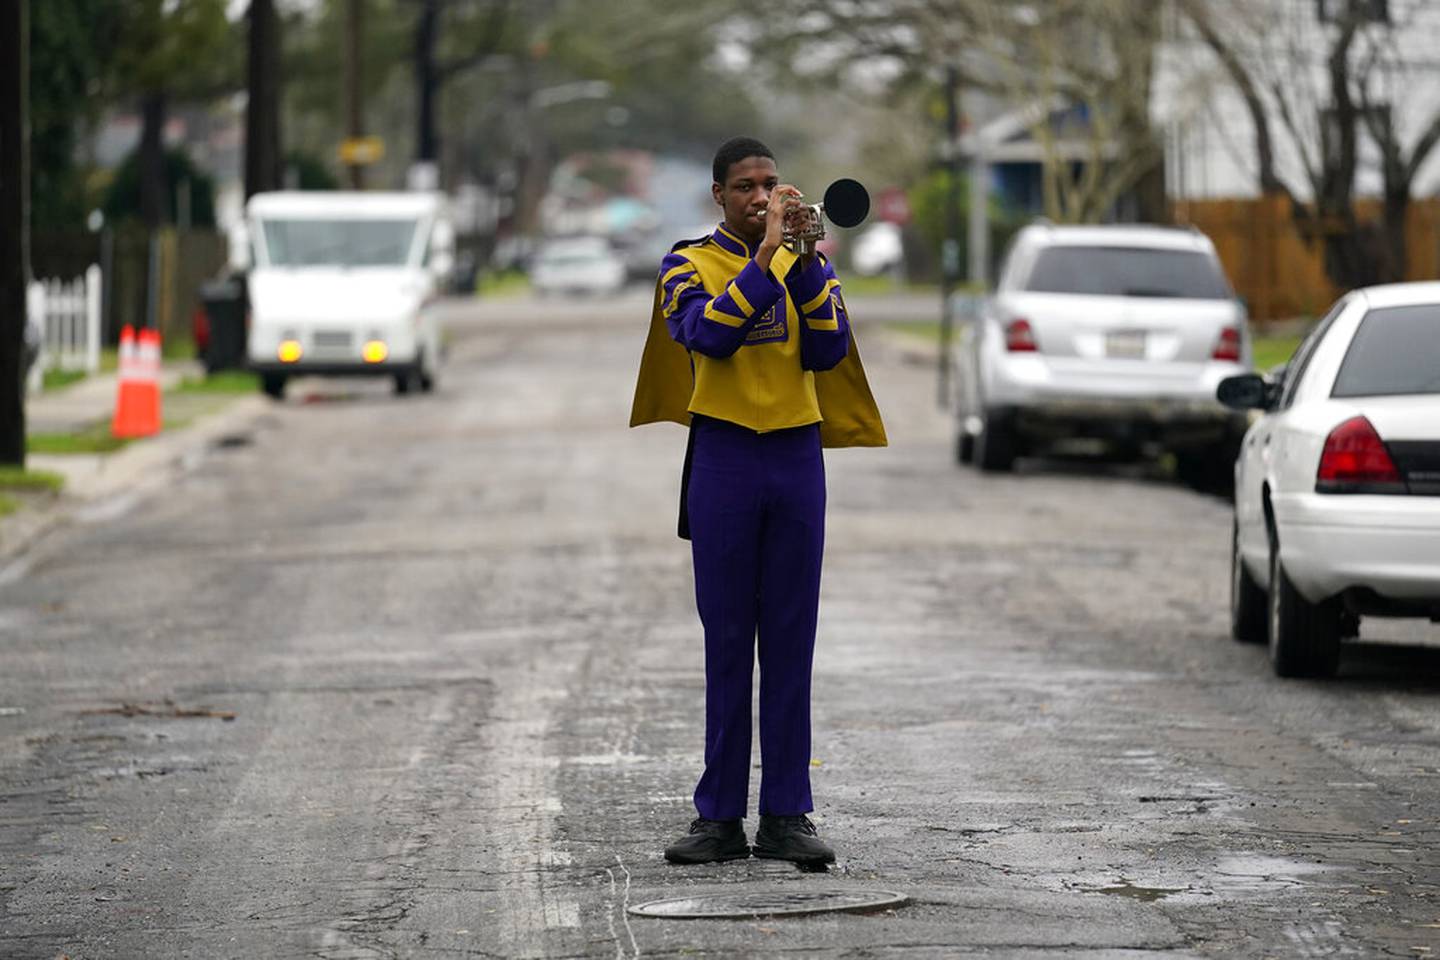 Elvin King III a senior at Warren Easton High and member of their marching band, which will not march because parades are cancelled, poses for a portrait in front of his home in New Orleans, Friday, Feb. 12, 2021. New Orleans' annual pre-Lenten Mardi Gras celebration is muted this year because of the coronavirus pandemic. Parades canceled. Bars closed. Crowds suppressed. Mardi Gras joy is muted this year in New Orleans as authorities seek to stifle the coronavirus's spread. And it's a blow to the tradition-bound city's party-loving soul.